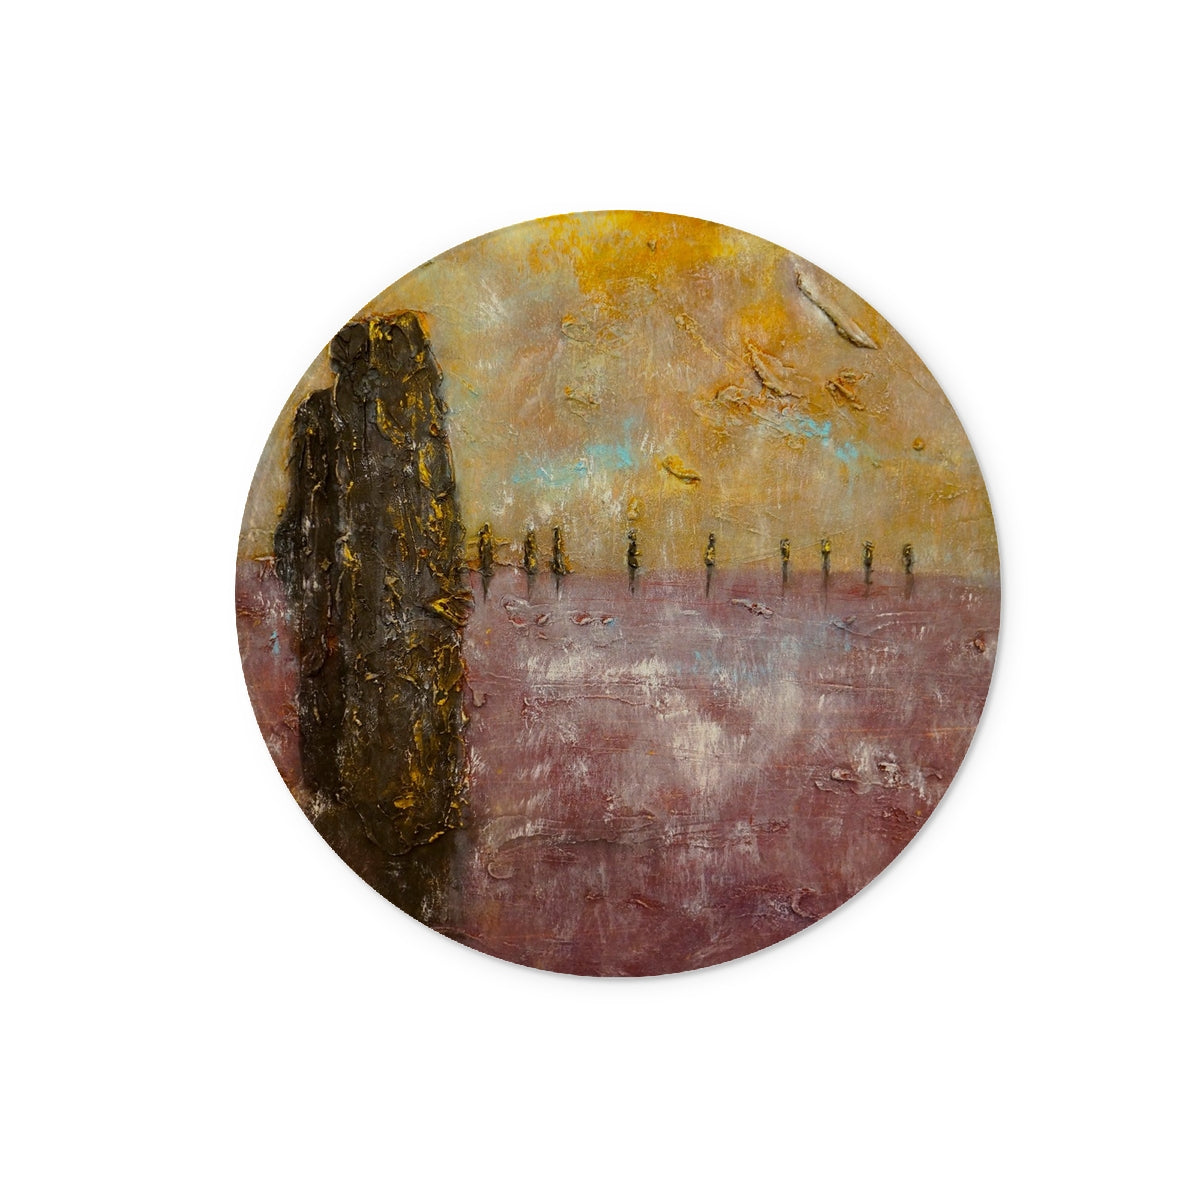 Bordgar Mist Orkney Art Gifts Glass Chopping Board-Glass Chopping Boards-Orkney Art Gallery-12" Round-Paintings, Prints, Homeware, Art Gifts From Scotland By Scottish Artist Kevin Hunter